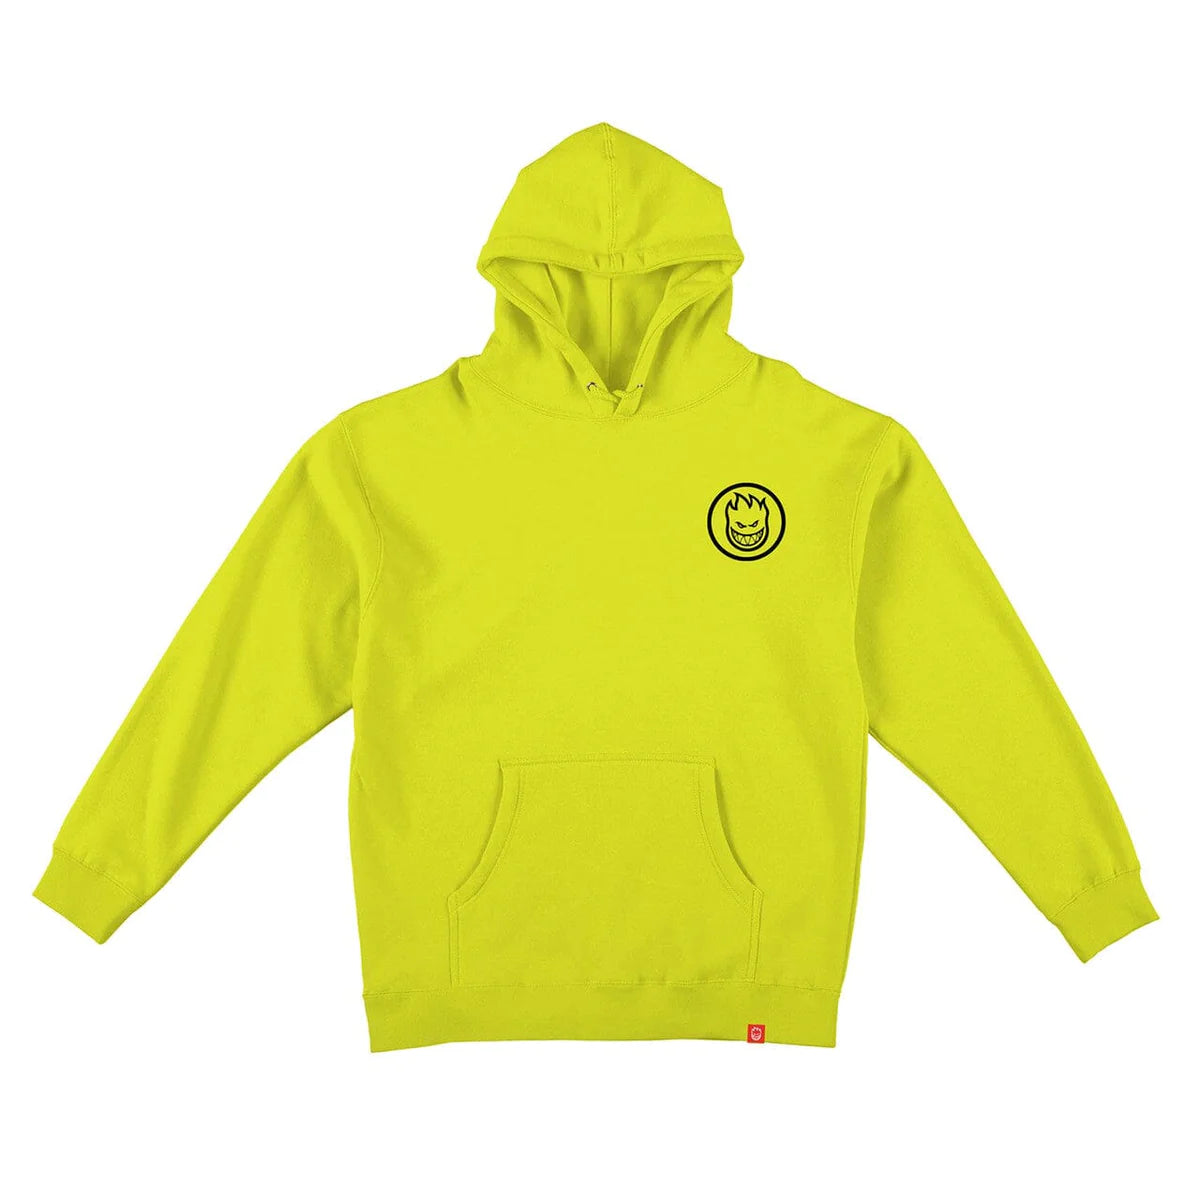 SPITFIRE WHEELS SWIRLED CLASSIC HOODIE - SAFETY YELLOW/BLACK